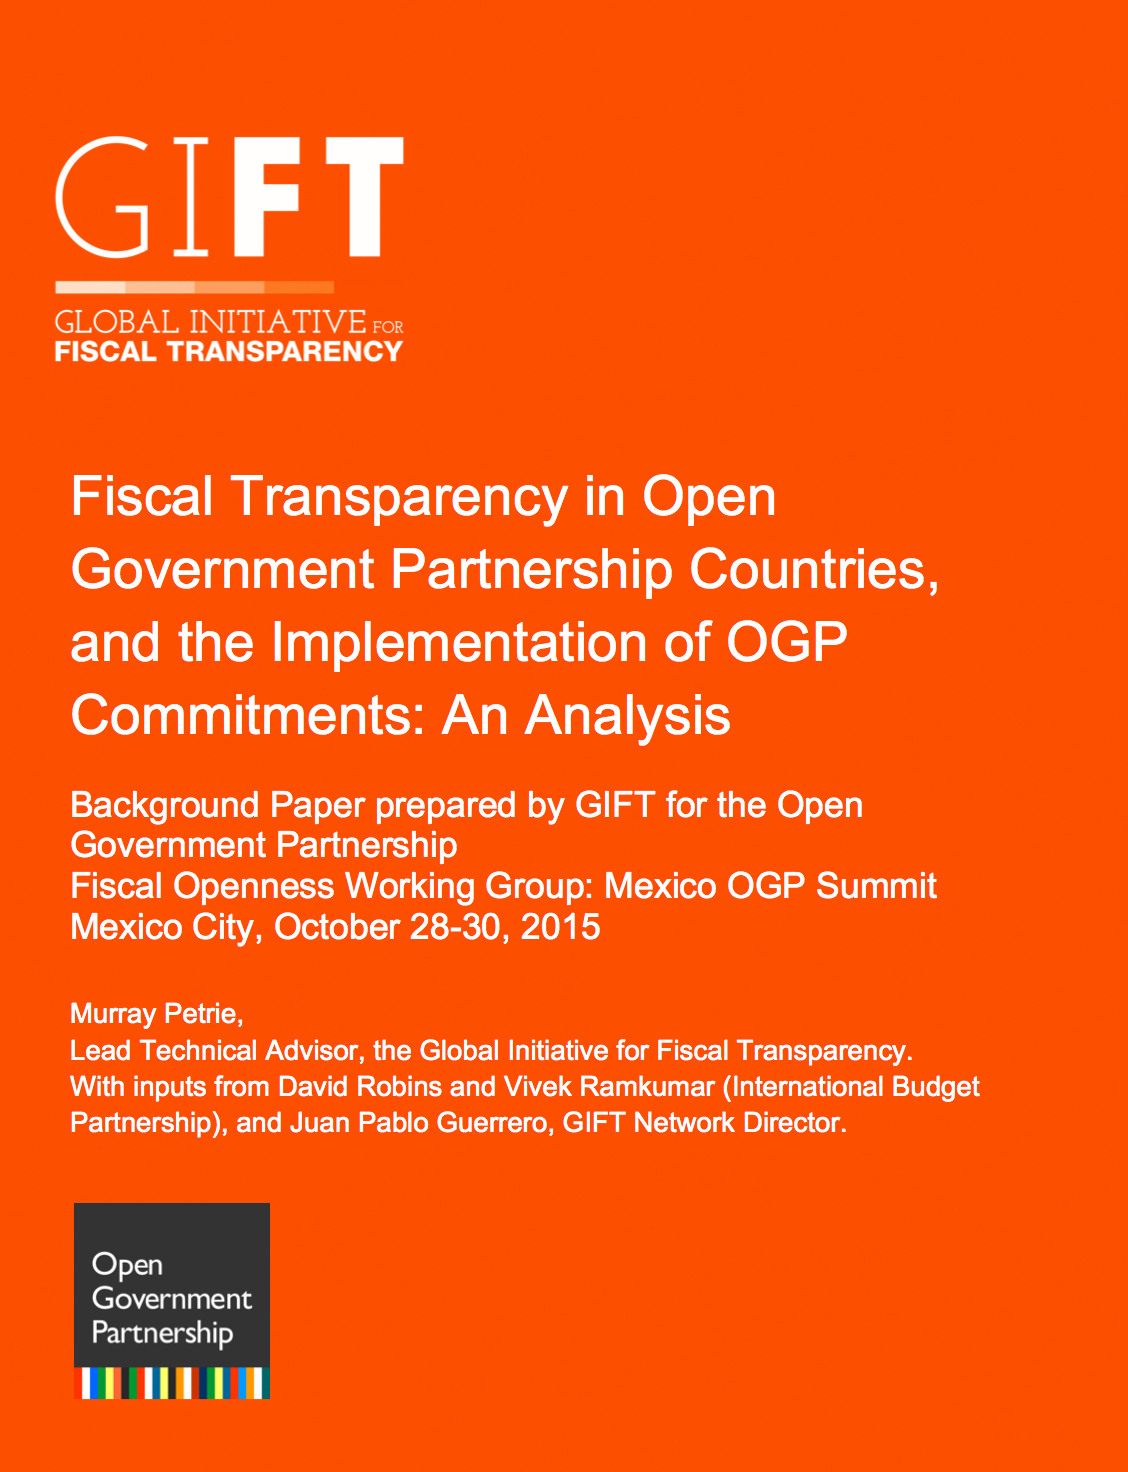 Fiscal Transparency in Open Government Partnership Countries, and the Implementation of OGP Commitments: An Analysis